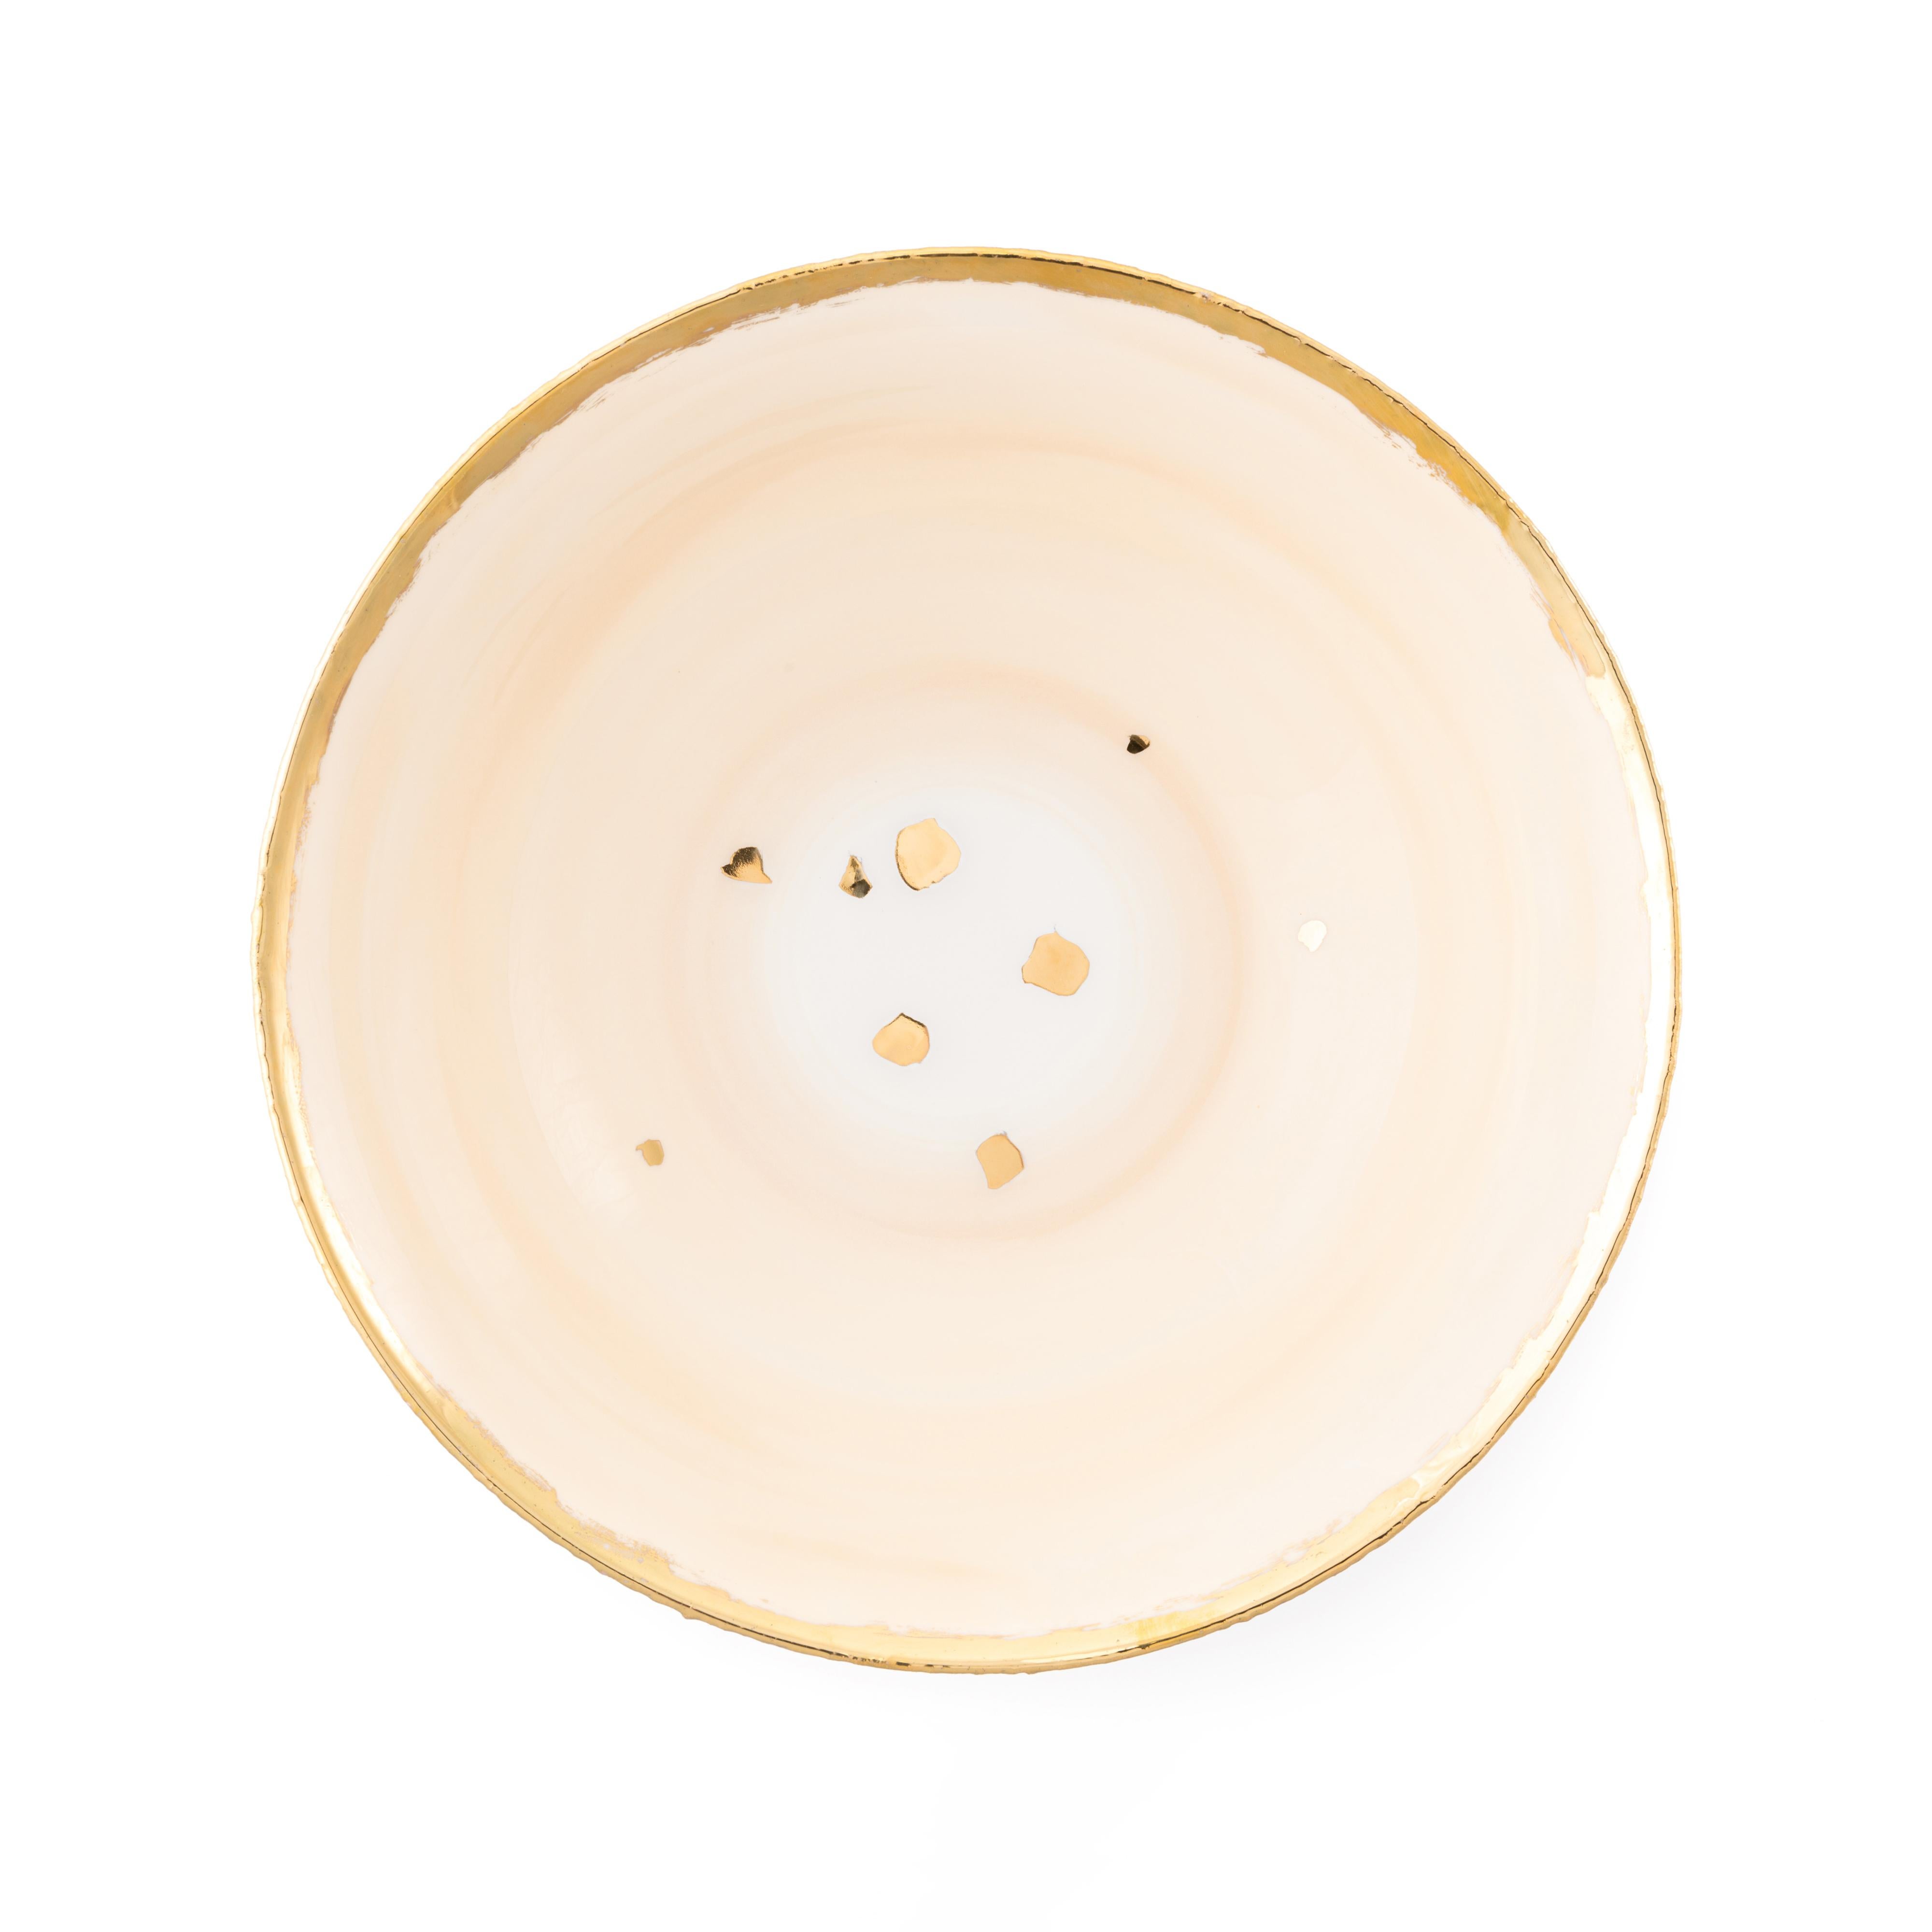 Michelangelo Bianco is an elegant tableware ideally suited for formal occasions and intimate events. Plates are decorated with a light beige enamel at the center. They feature a new, exclusive golden edge with a precious, slightly rough feeling at